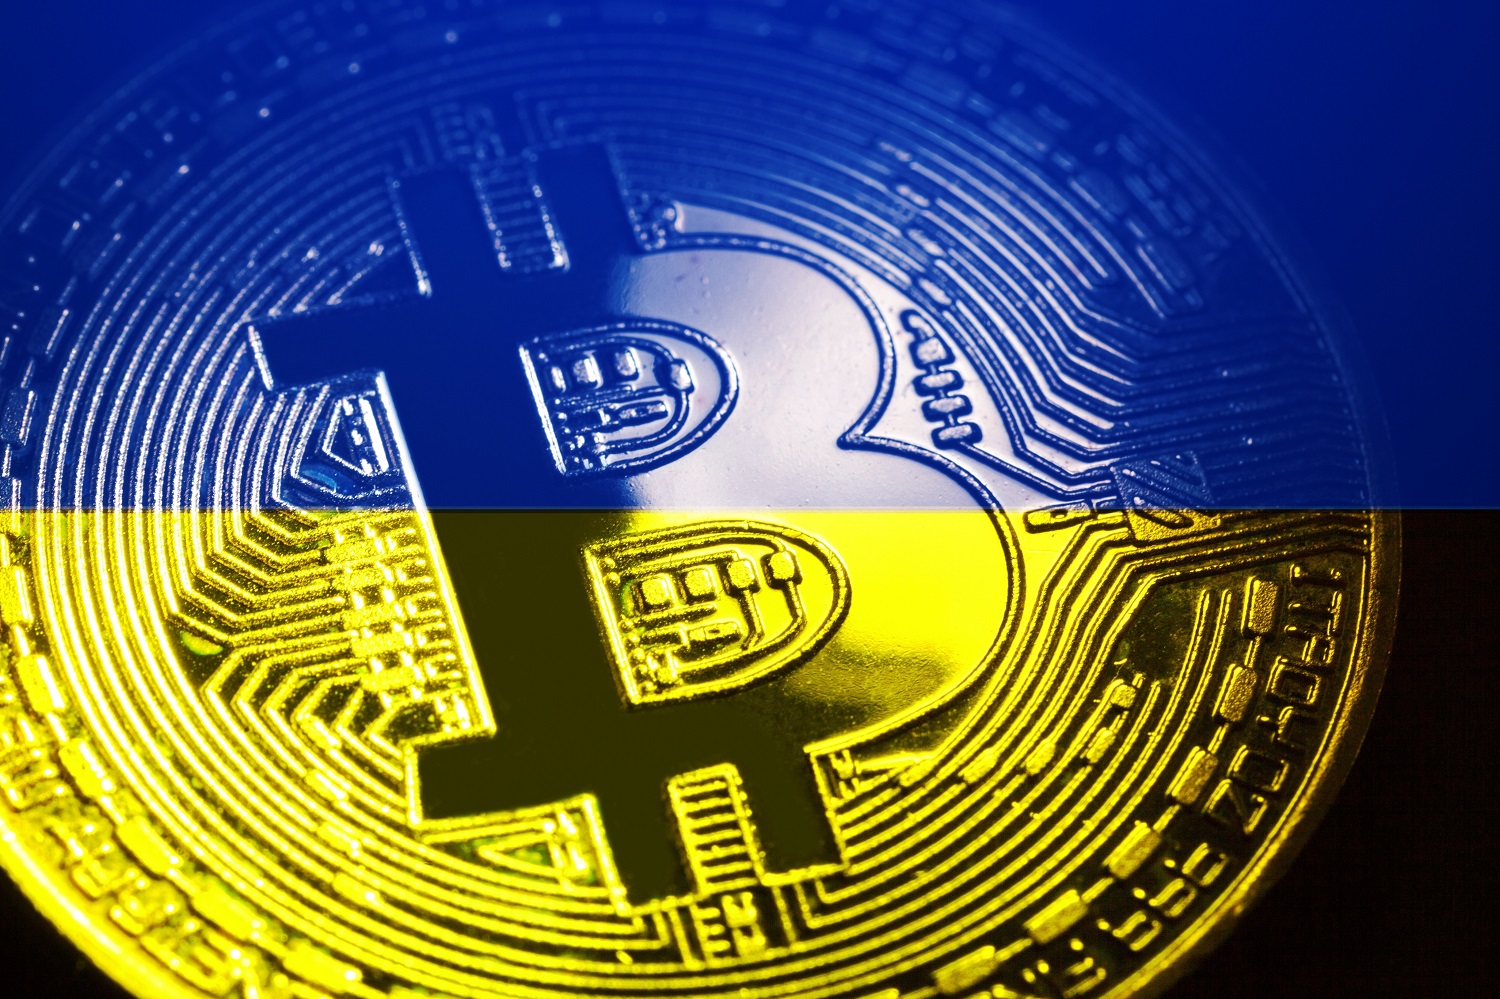 A token intended to represent Bitcoin decorated in the colors of the Ukrainian flag.